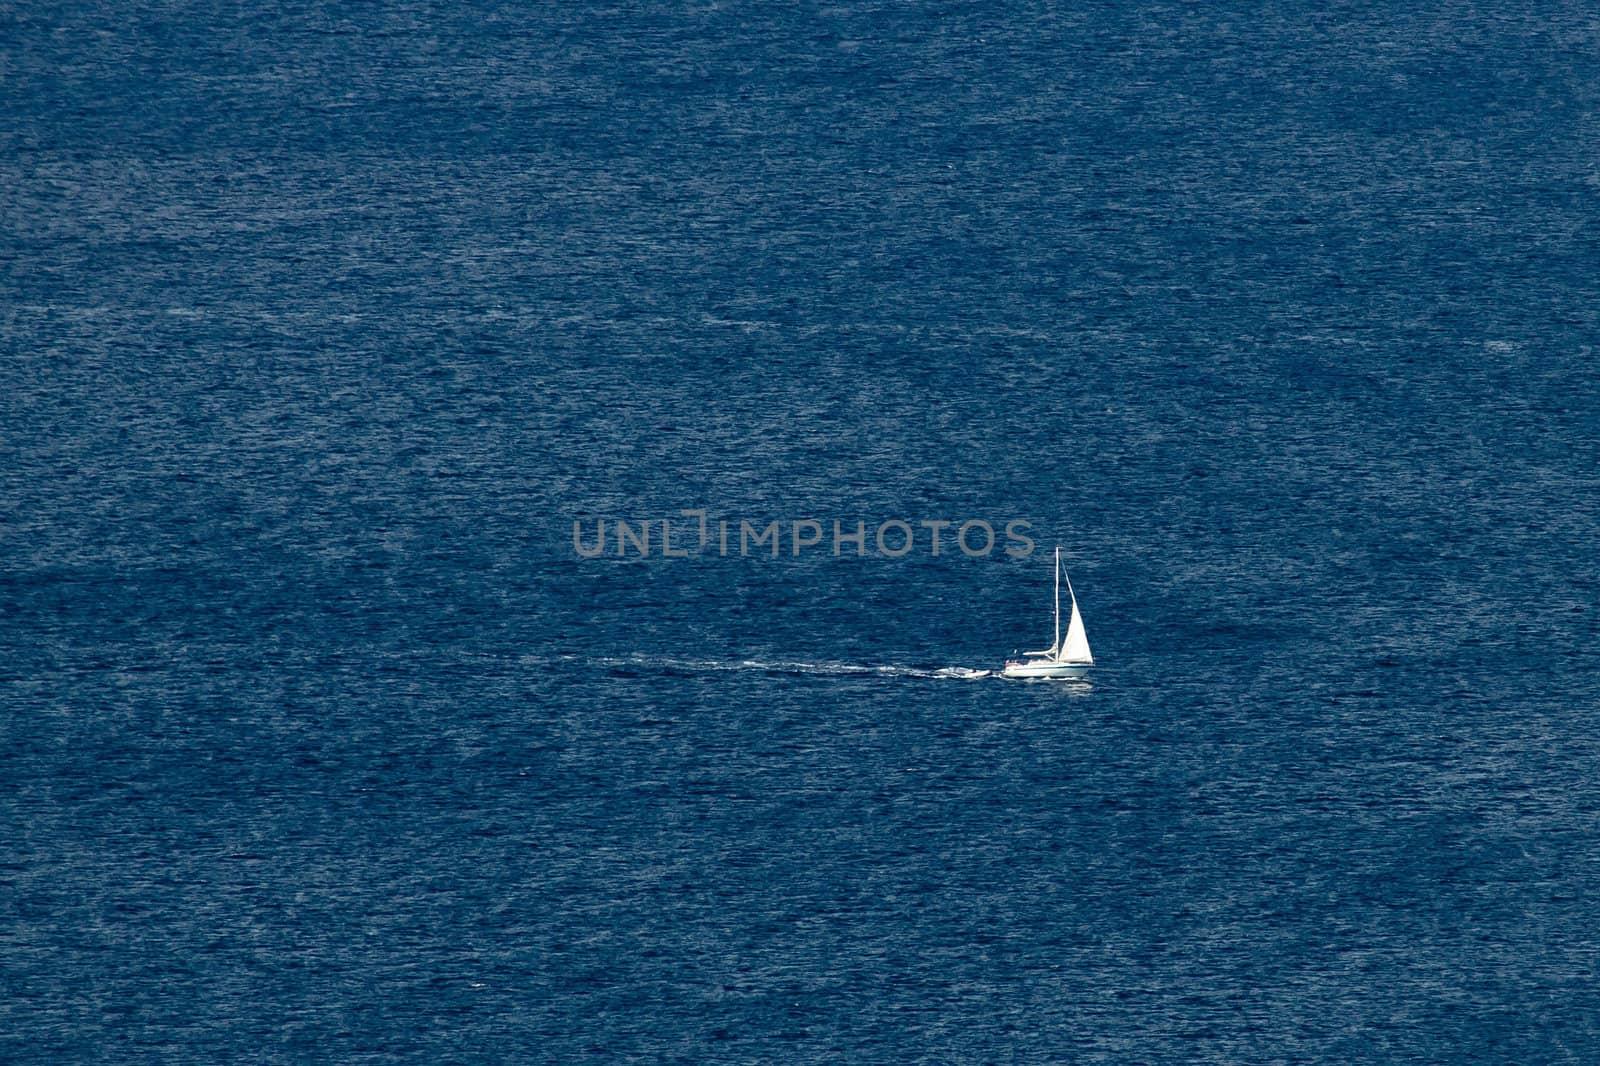 Sailboat on open sea by xbrchx